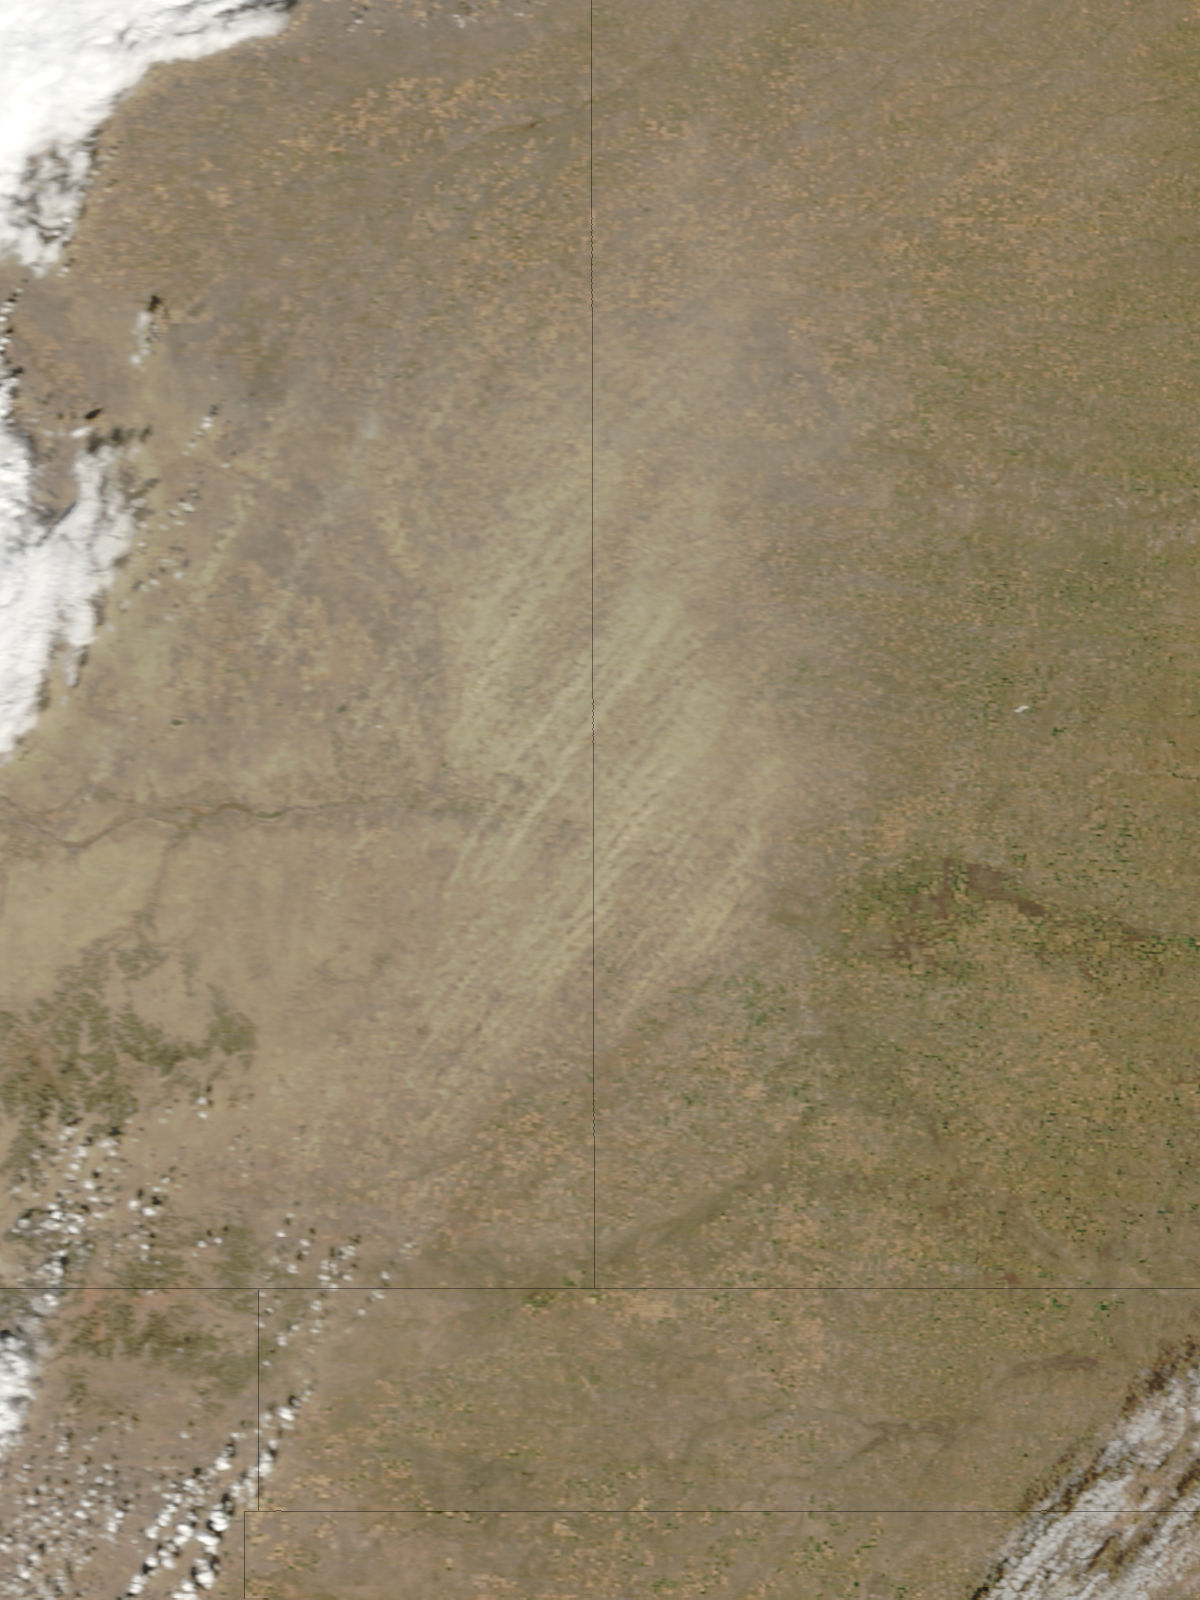 Dust storms in Kansas and Colorado - related image preview